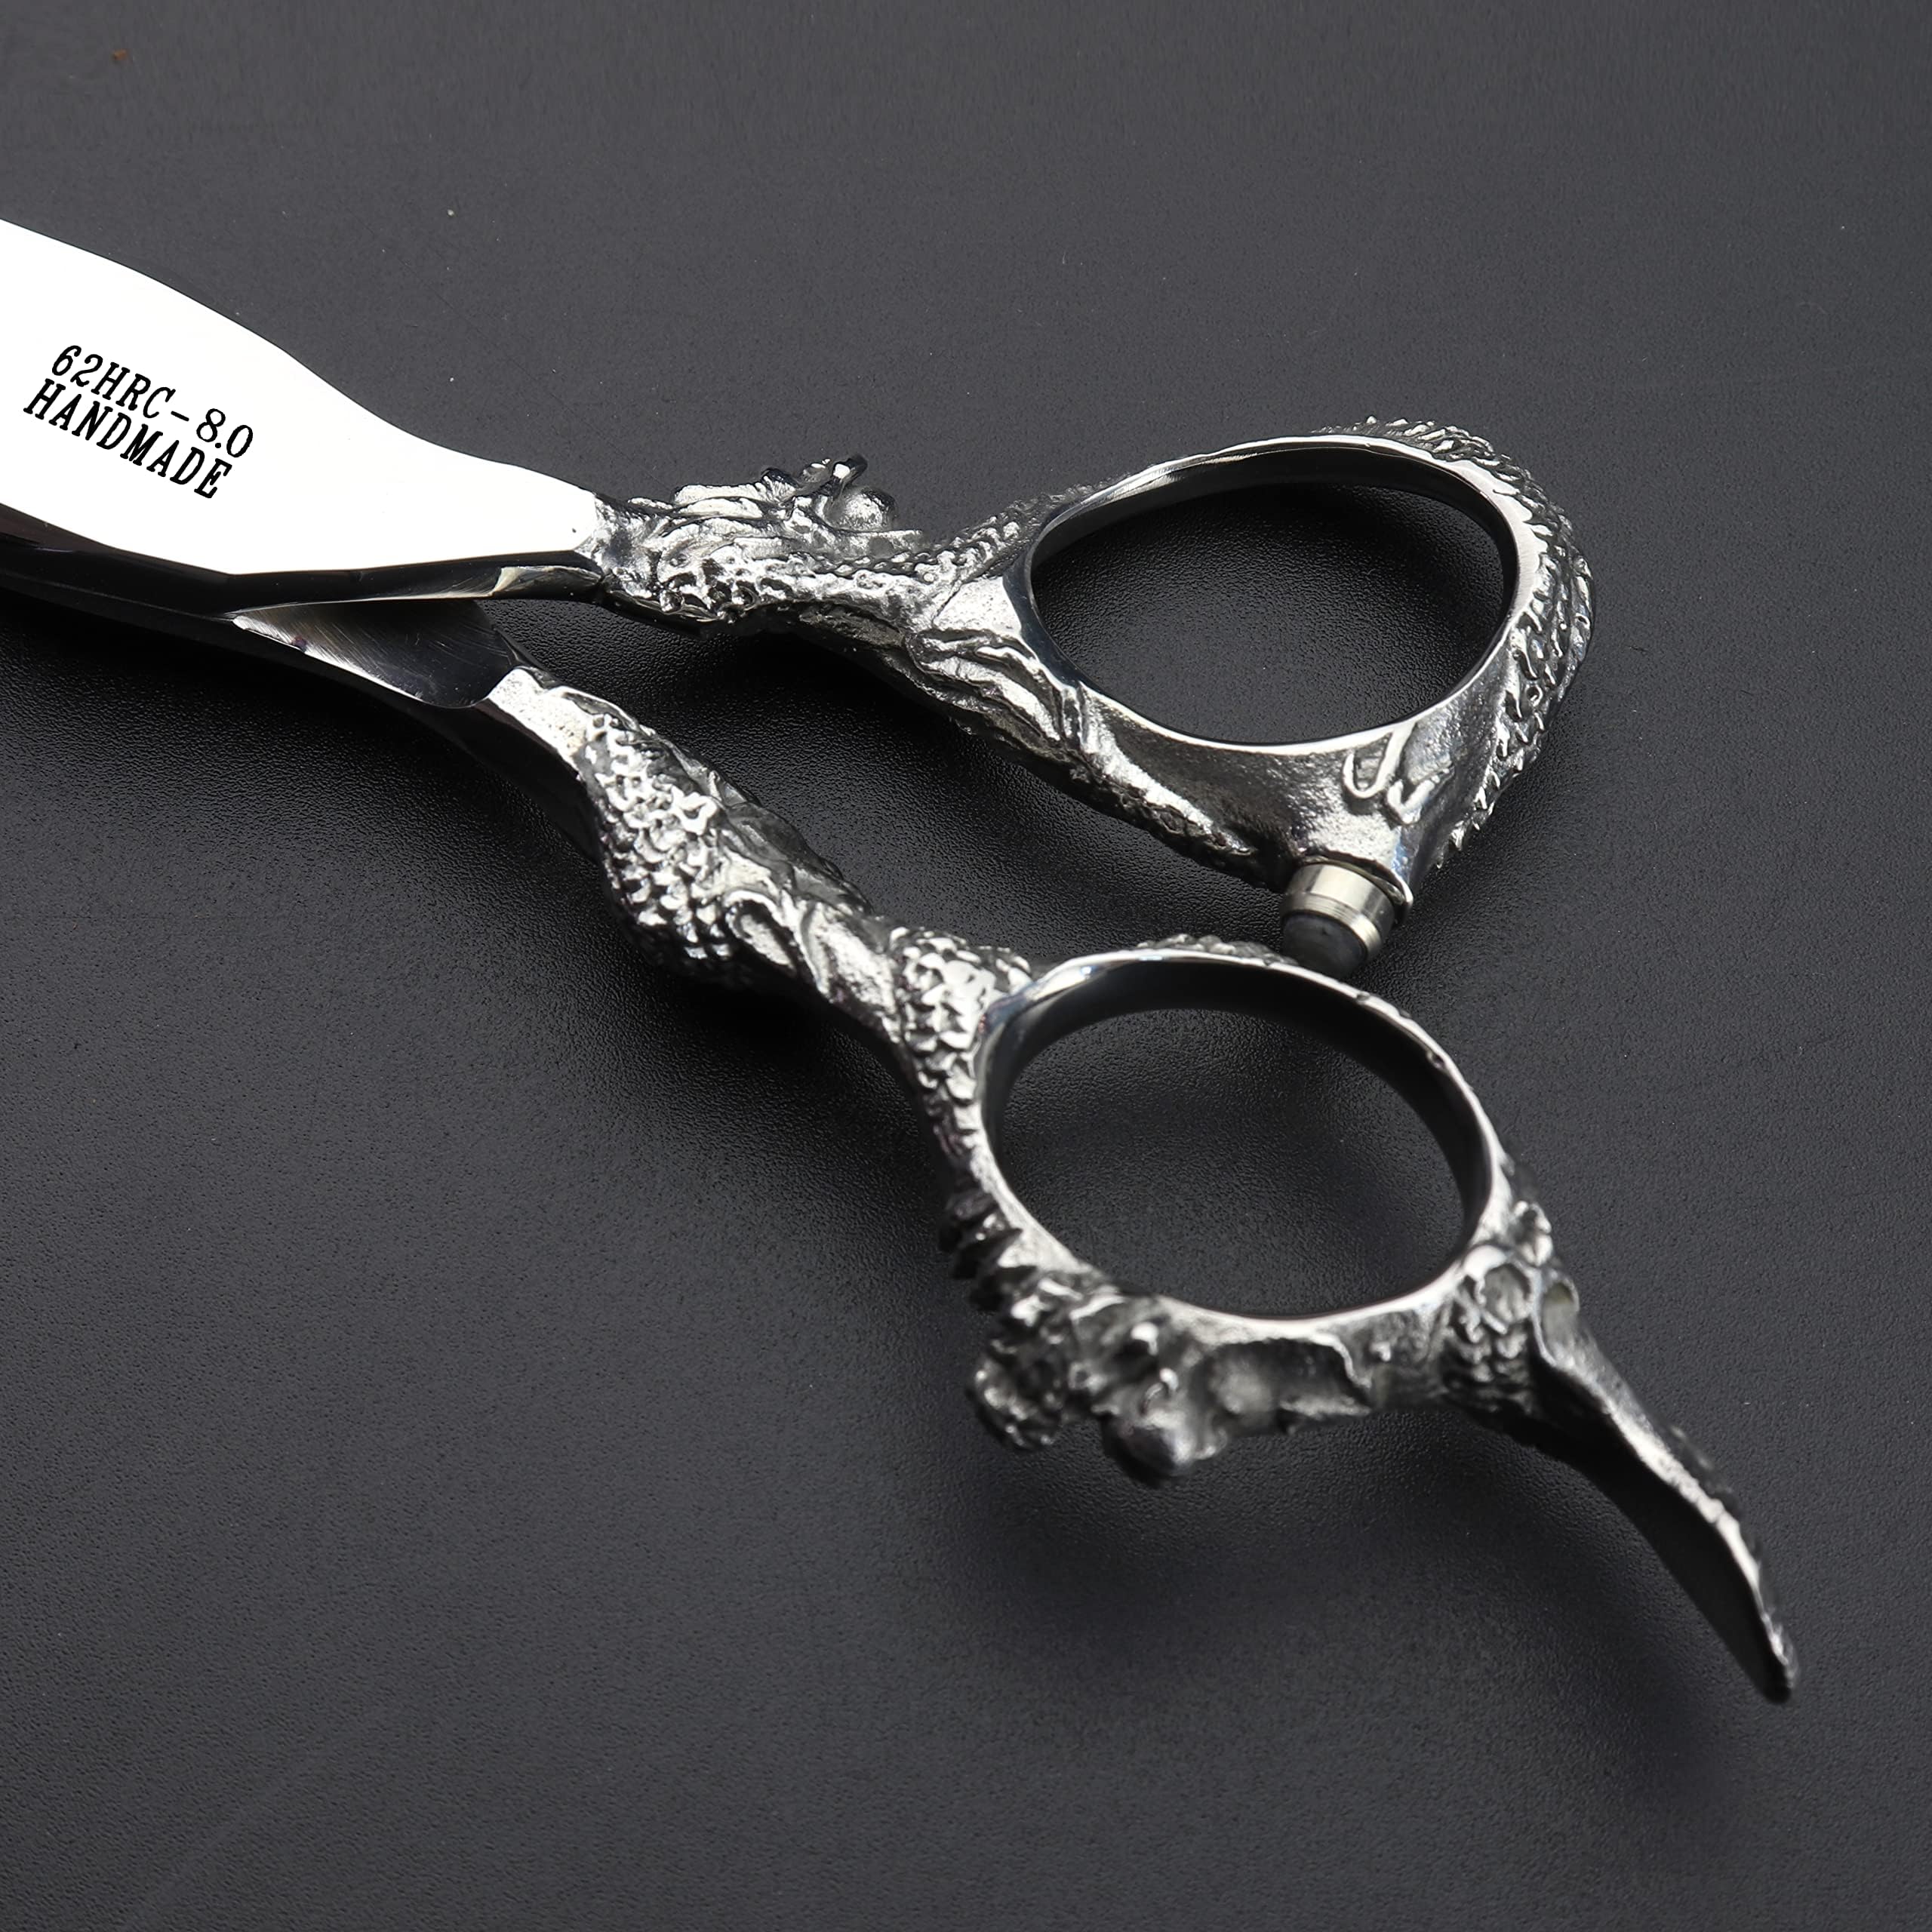 6/7/8/9 inch Professional Hair Cutting Thinning Scissors Barber Shears Hairdressing Salon Set (8 inch flat)